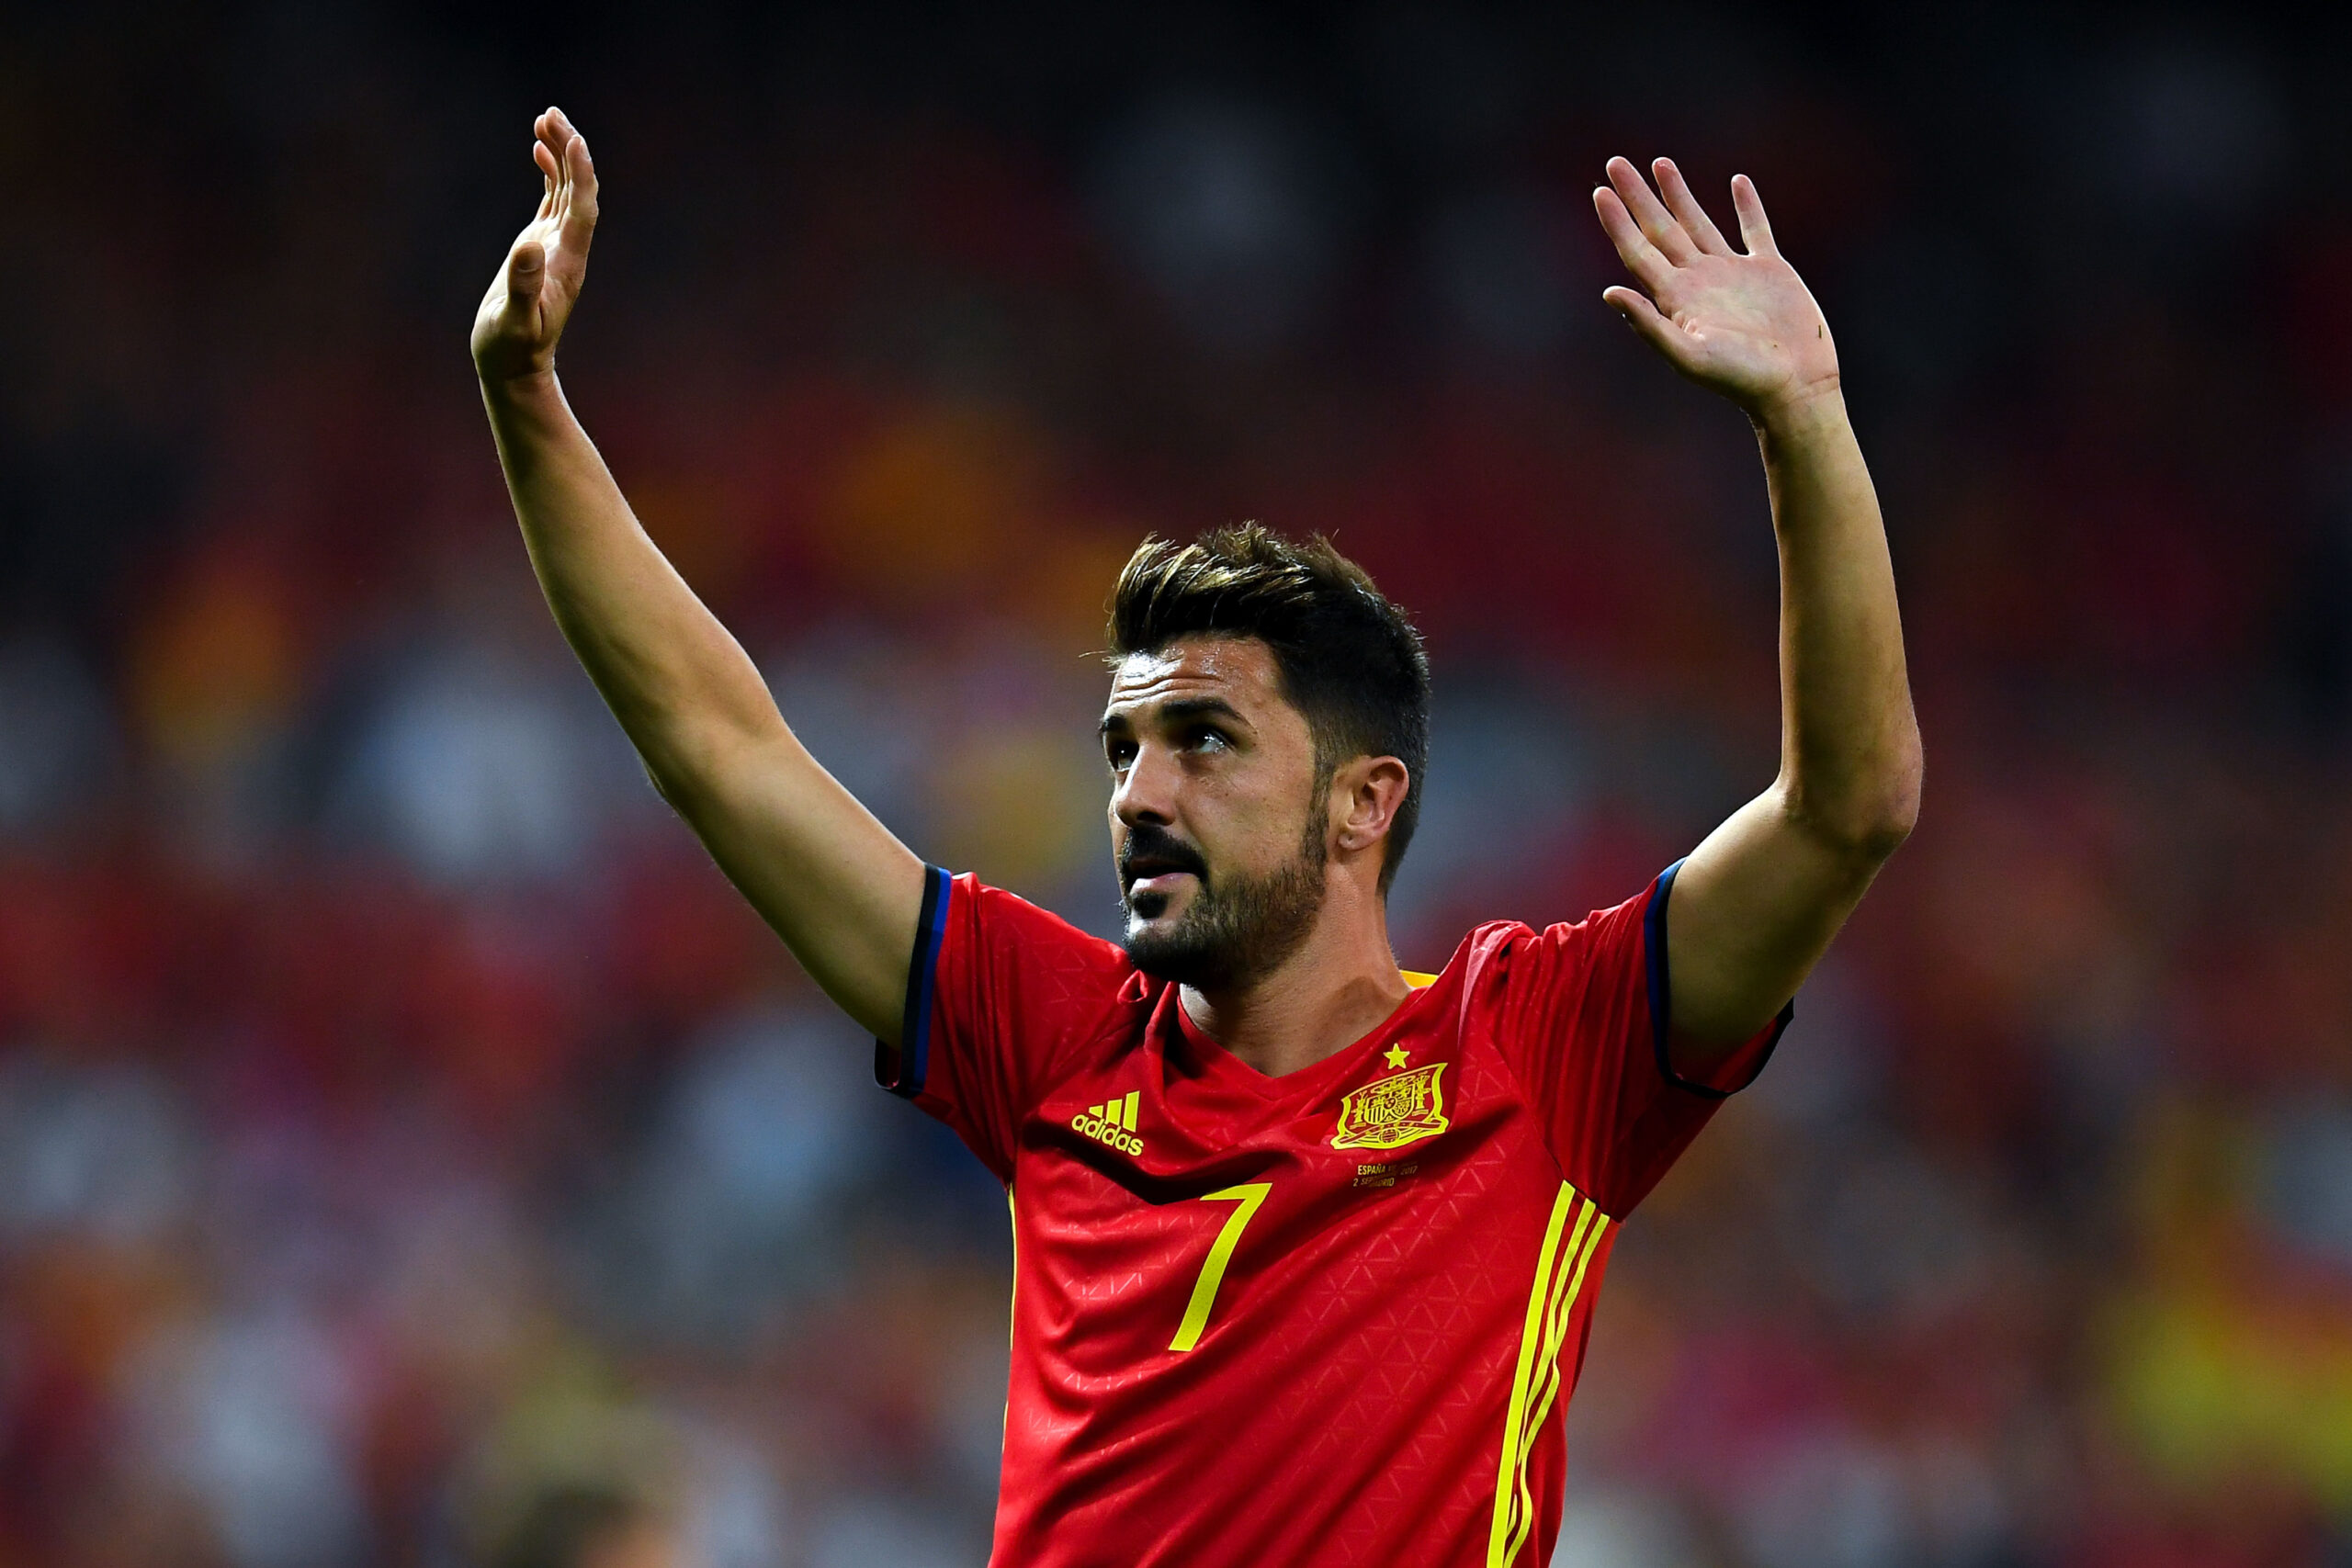 MADRID, SPAIN - SEPTEMBER 02: David Villa of Spain acknownledges the fans during the FIFA 2018 World Cup Qualifier between Spain and Italy at Estadio Santiago Bernabeu on September 2, 2017 in Madrid, Spain.